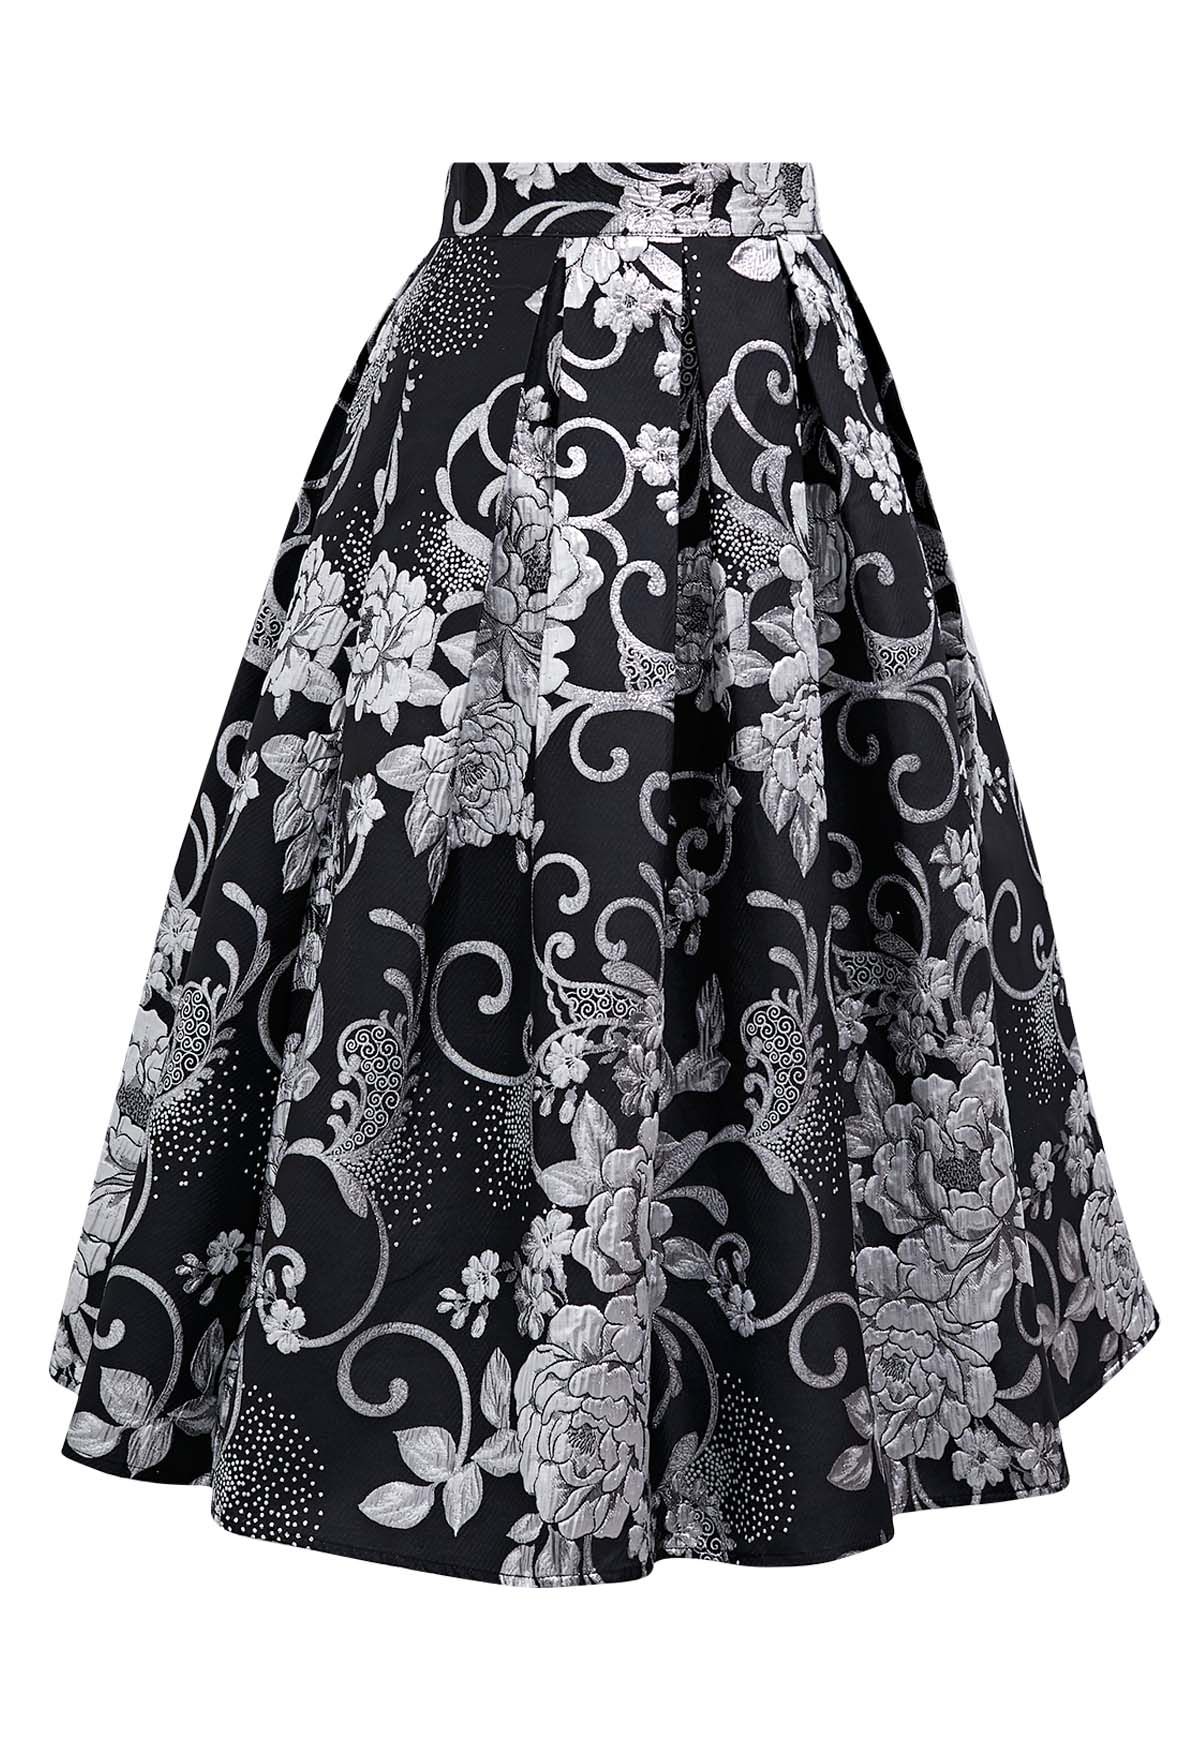 Florescent Jacquard A-Line Pleated Midi Skirt in Black